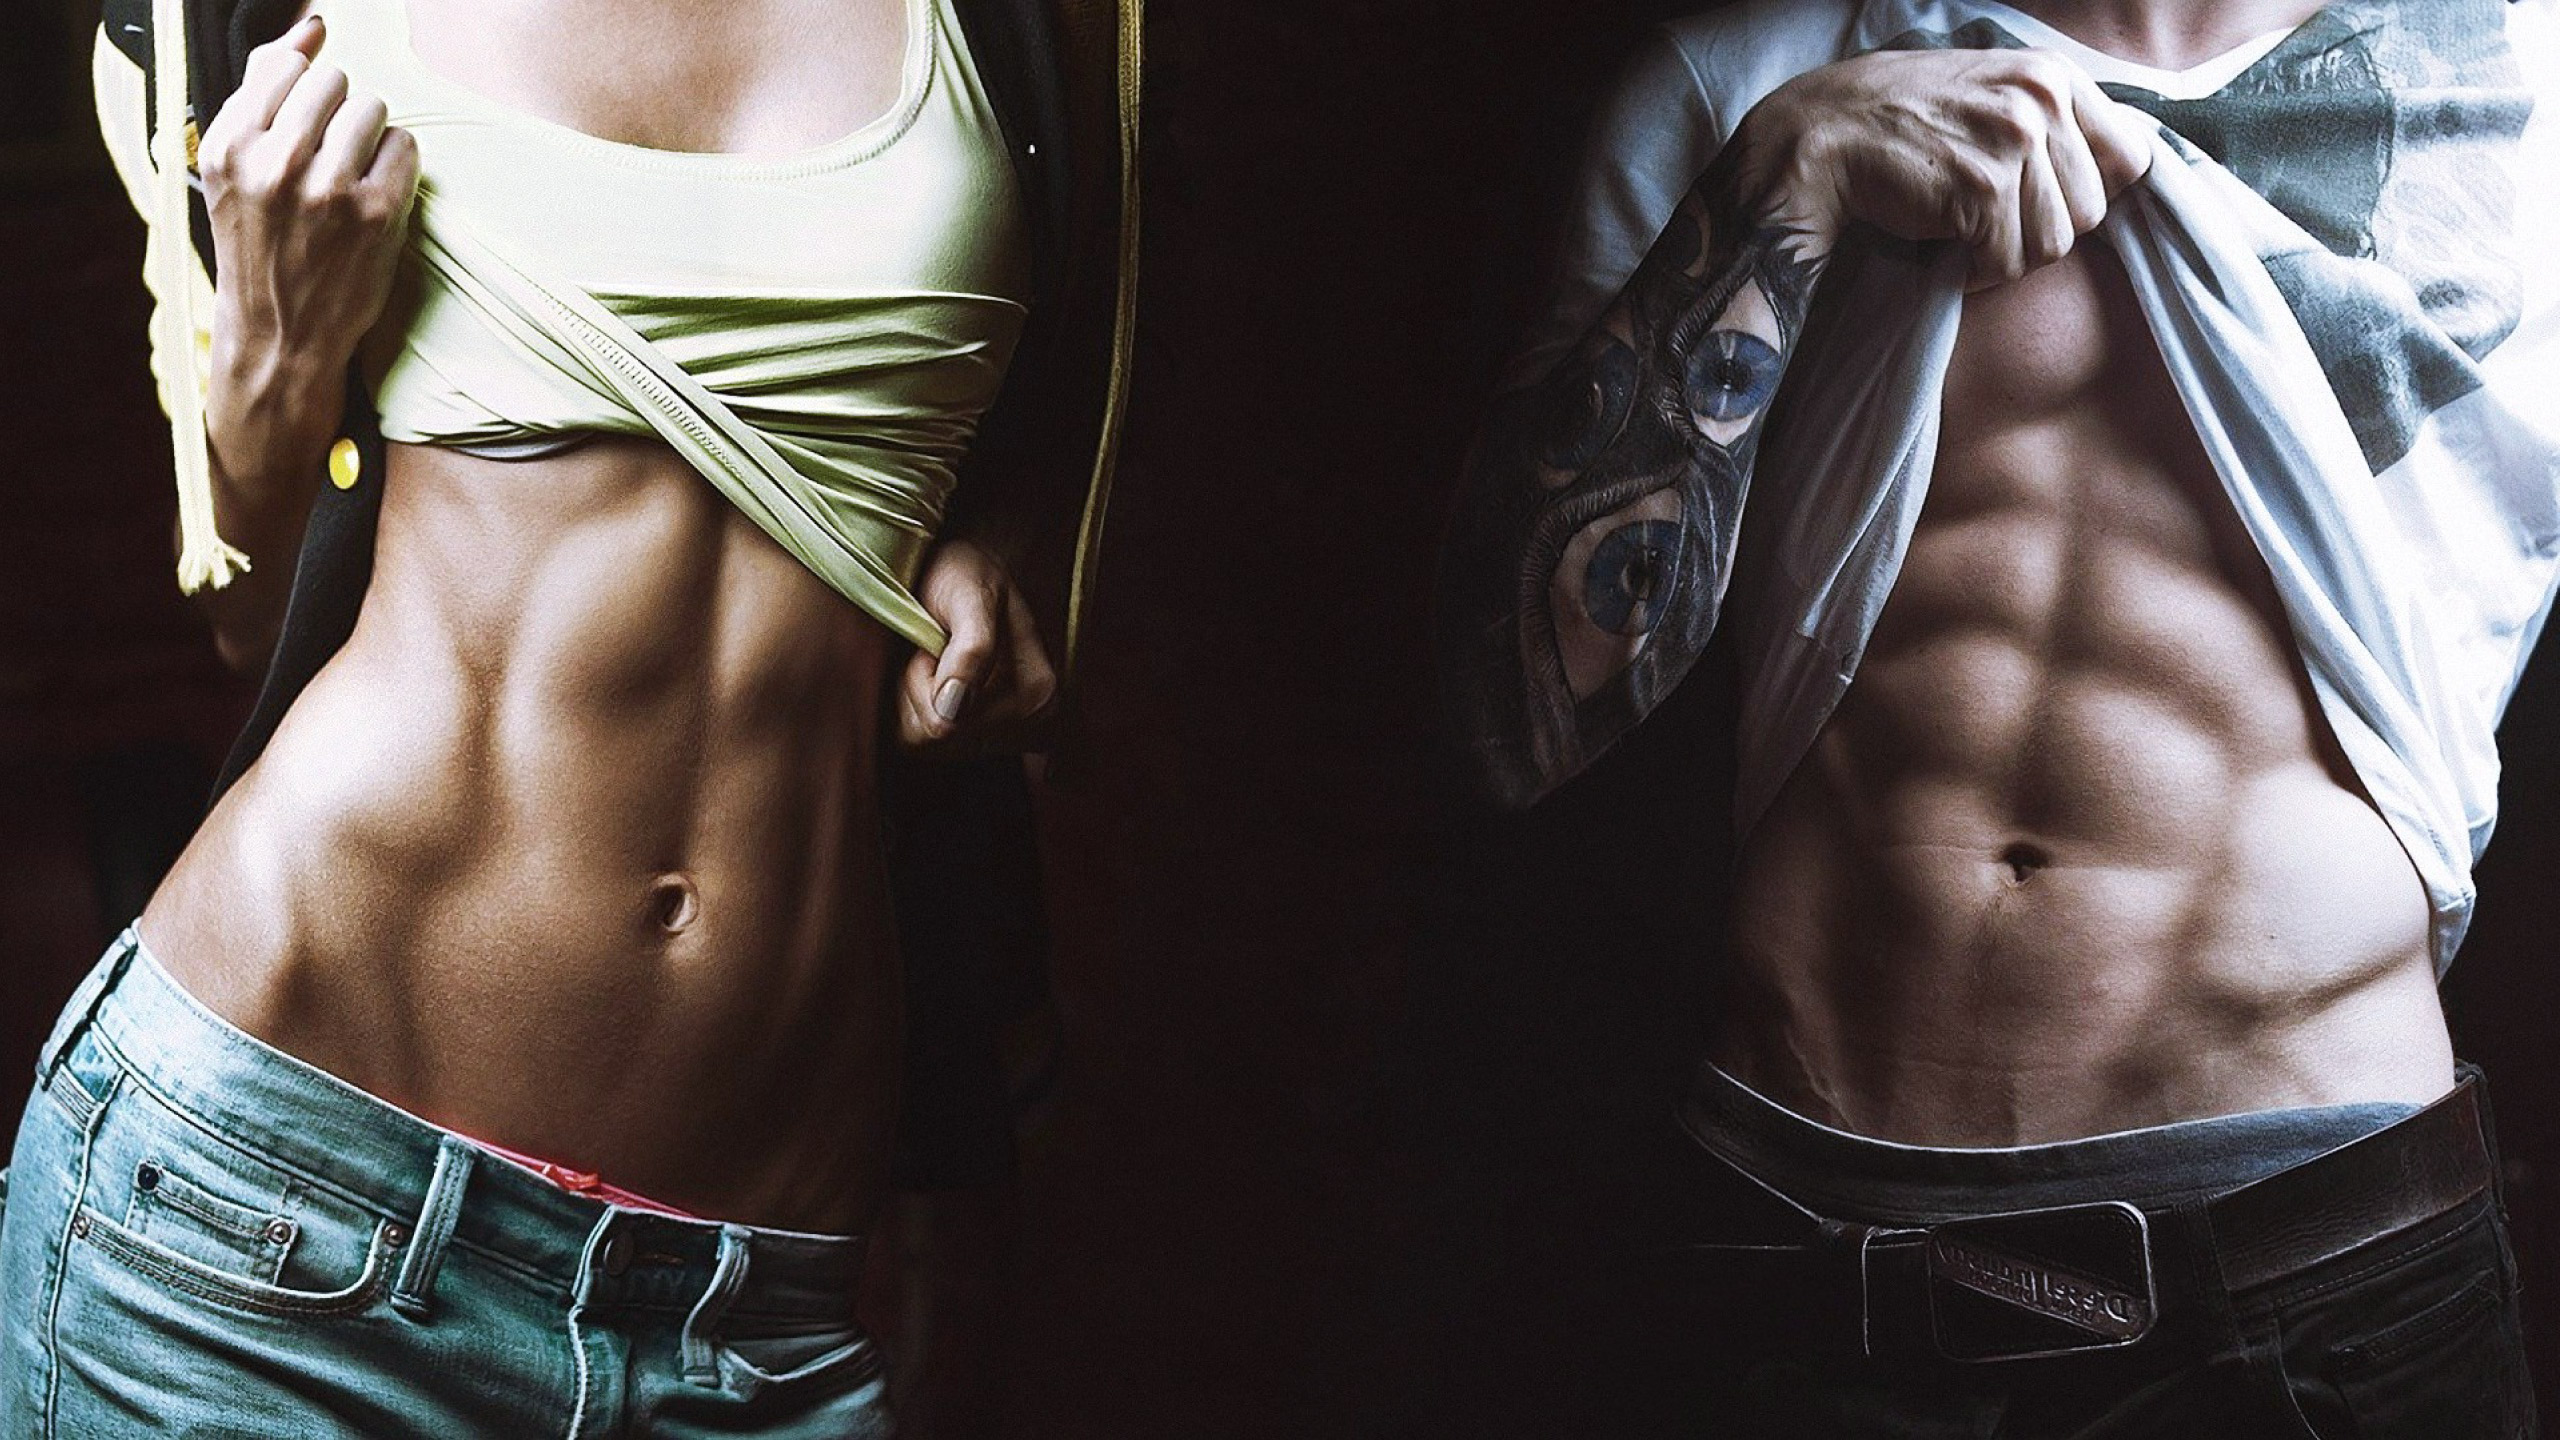 How to get abs of steel